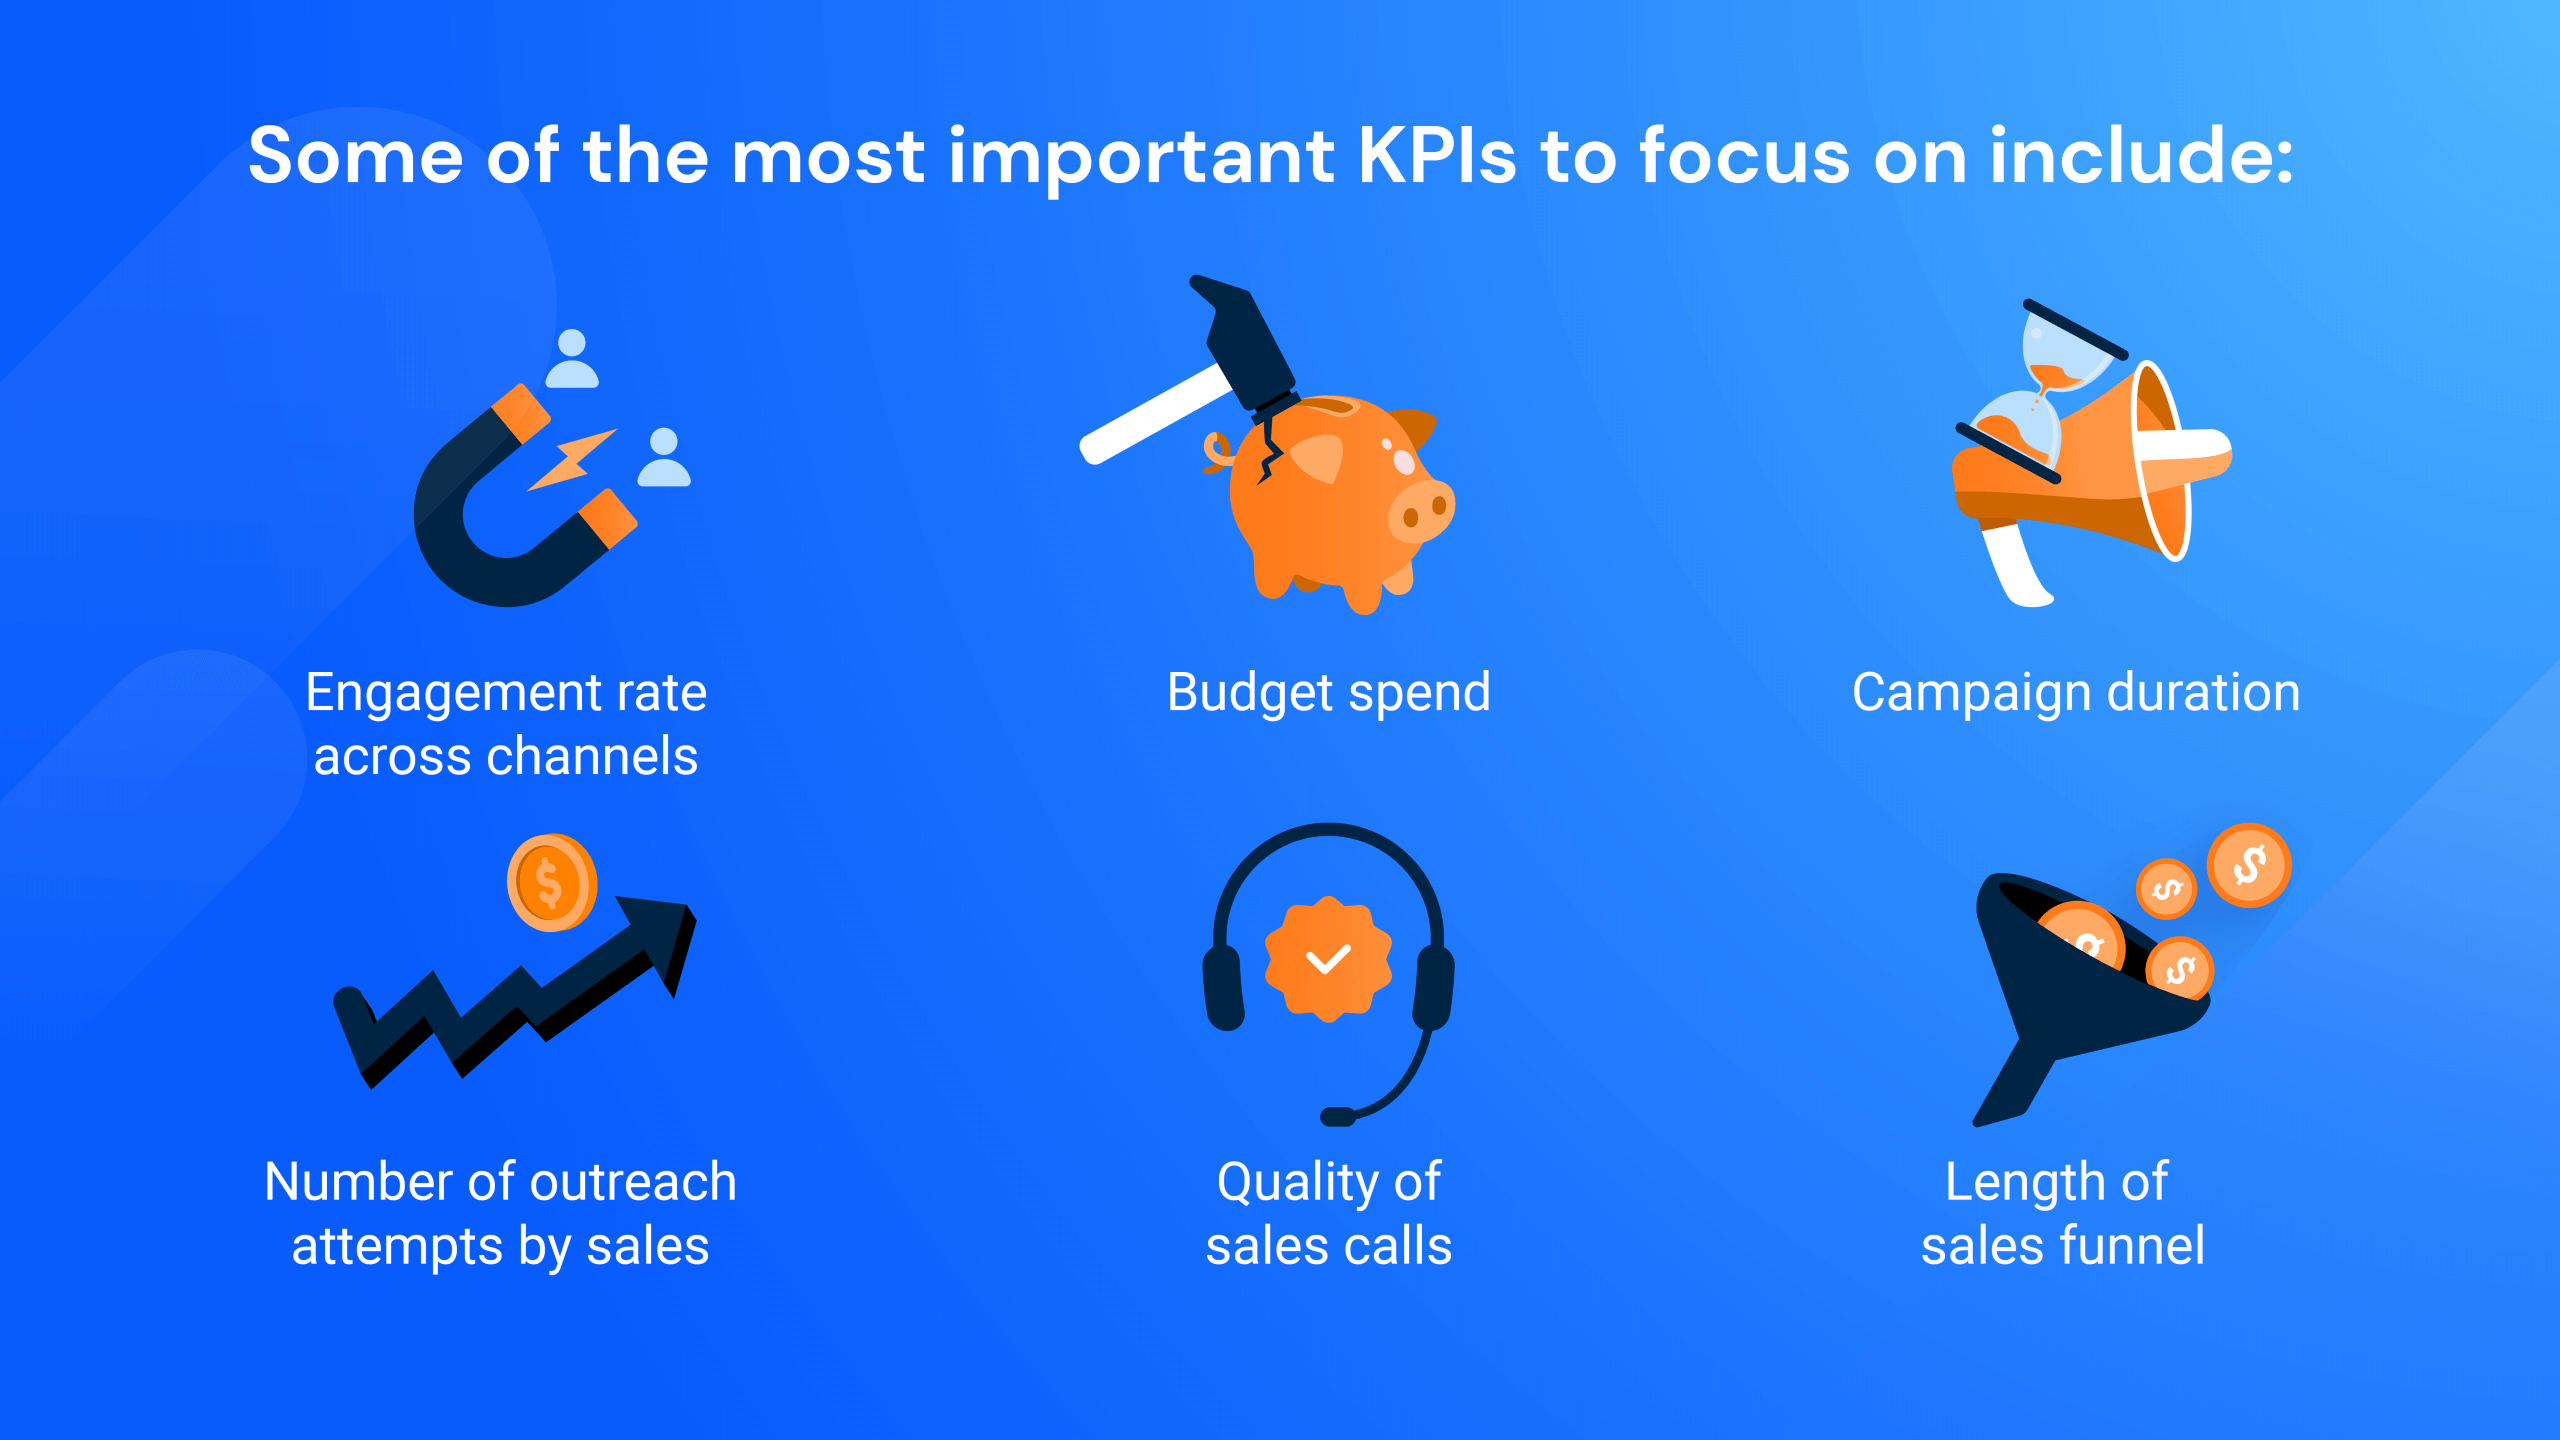 Some of the most important KPIs to focus on